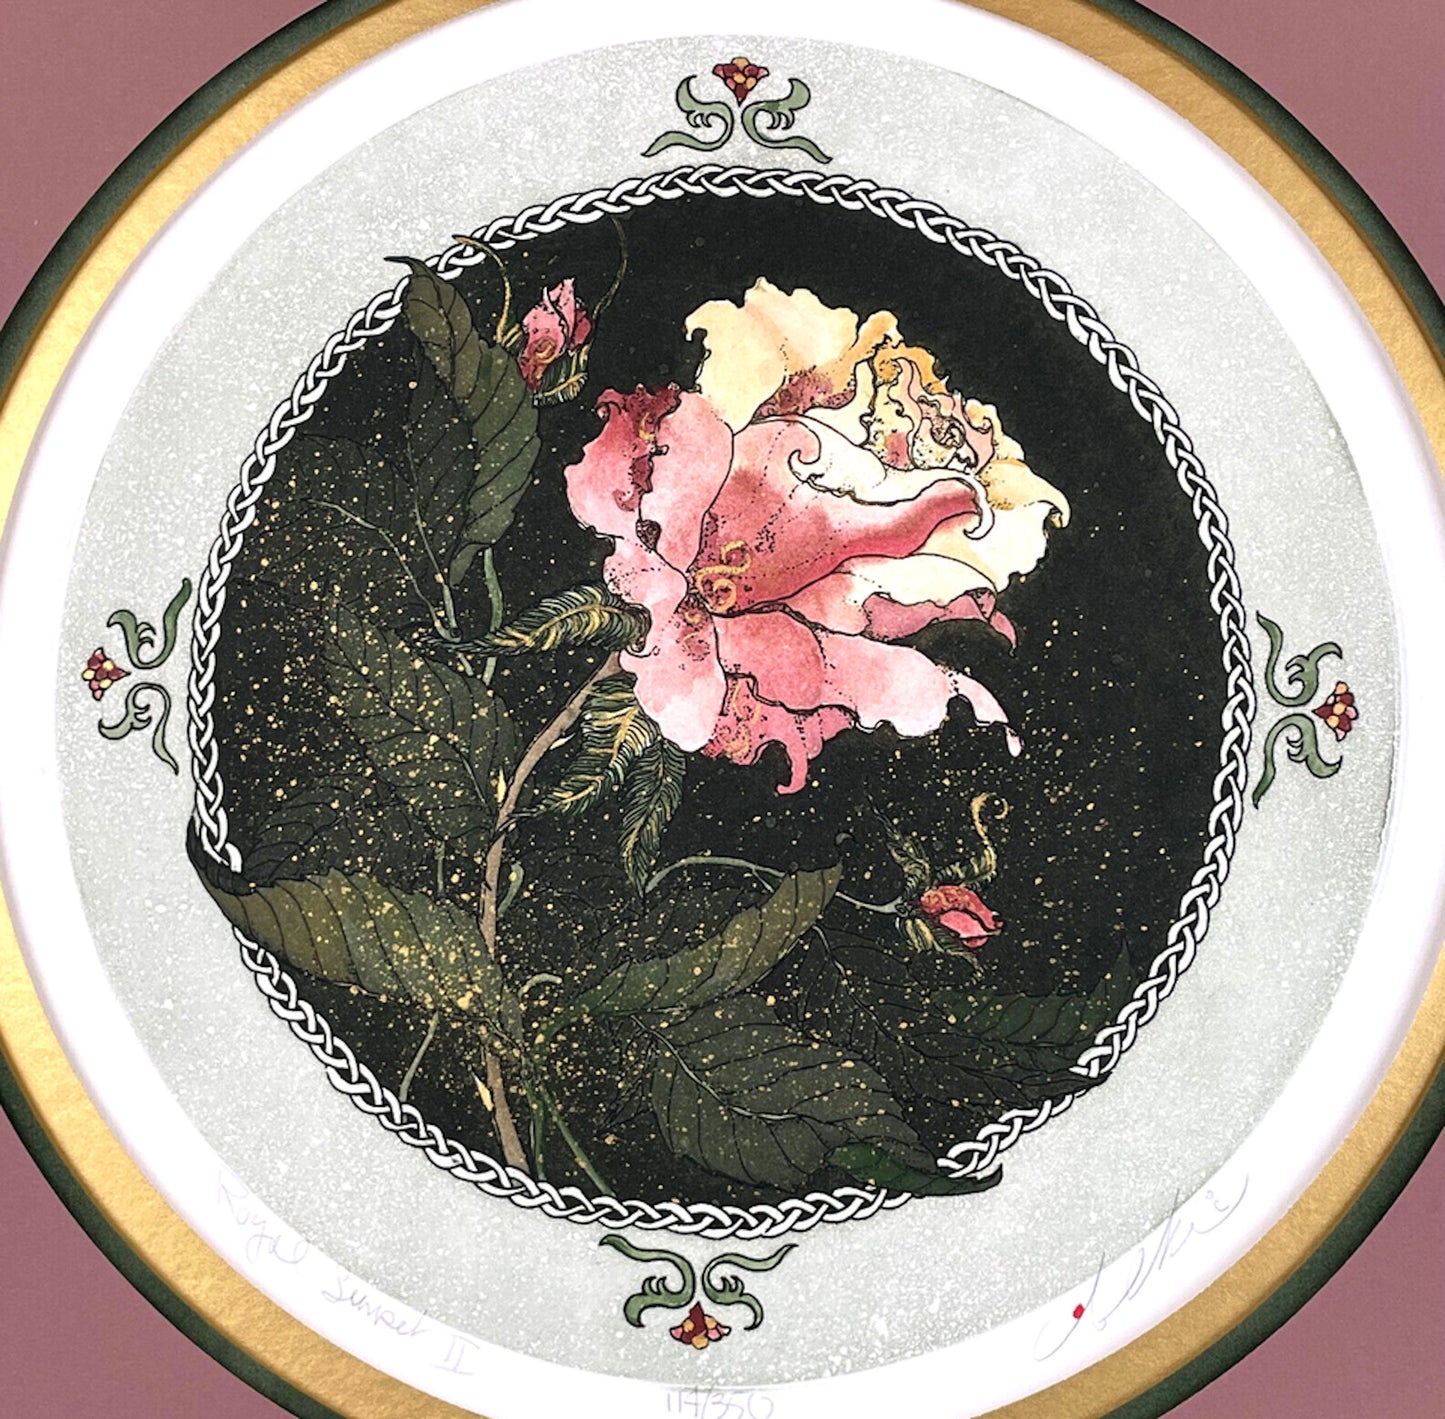 Victorian Themed Artist Signed Pink Rose Limited Edition Circular Etching